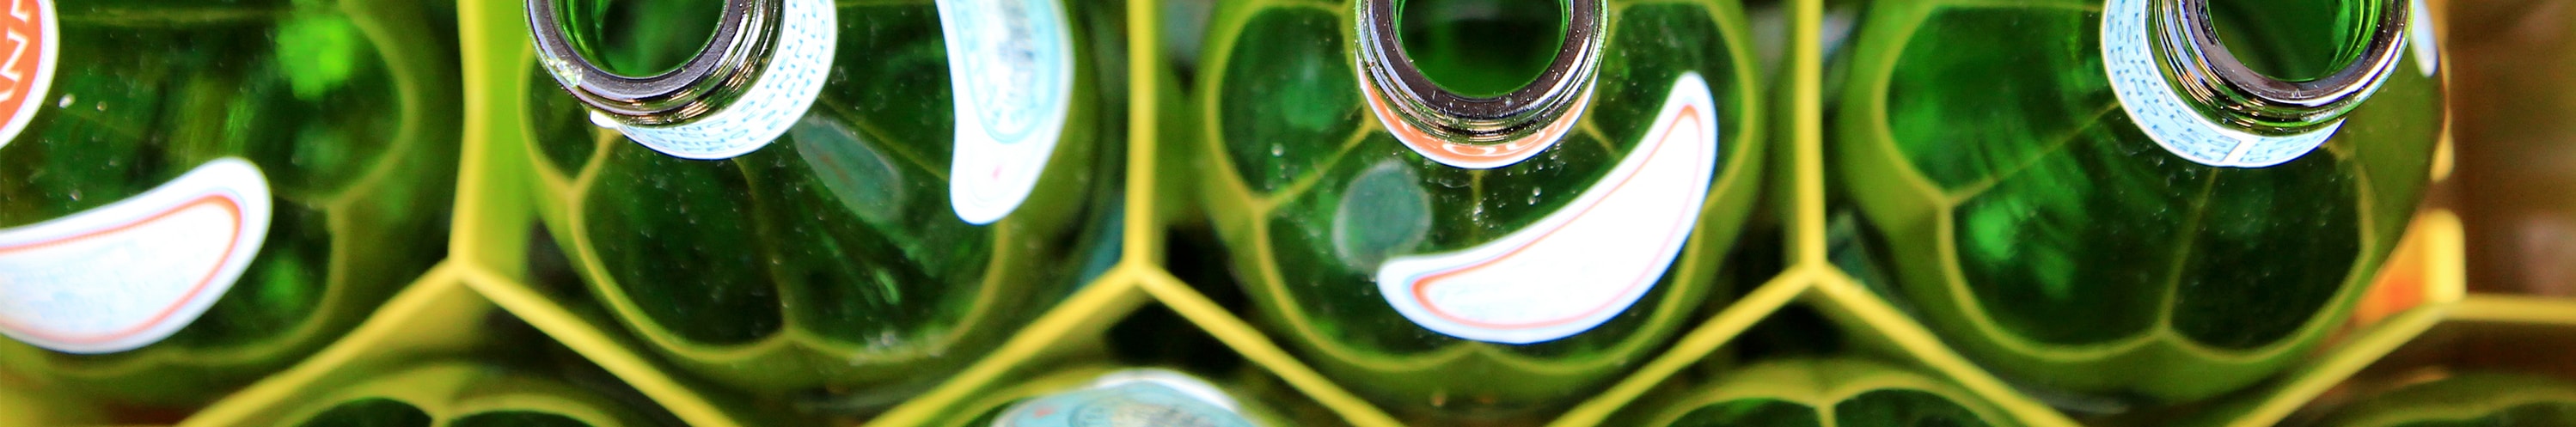 Thai Beverage has an estimated packaging waste of 394,000 t in 2022- largely comprises glass bottles